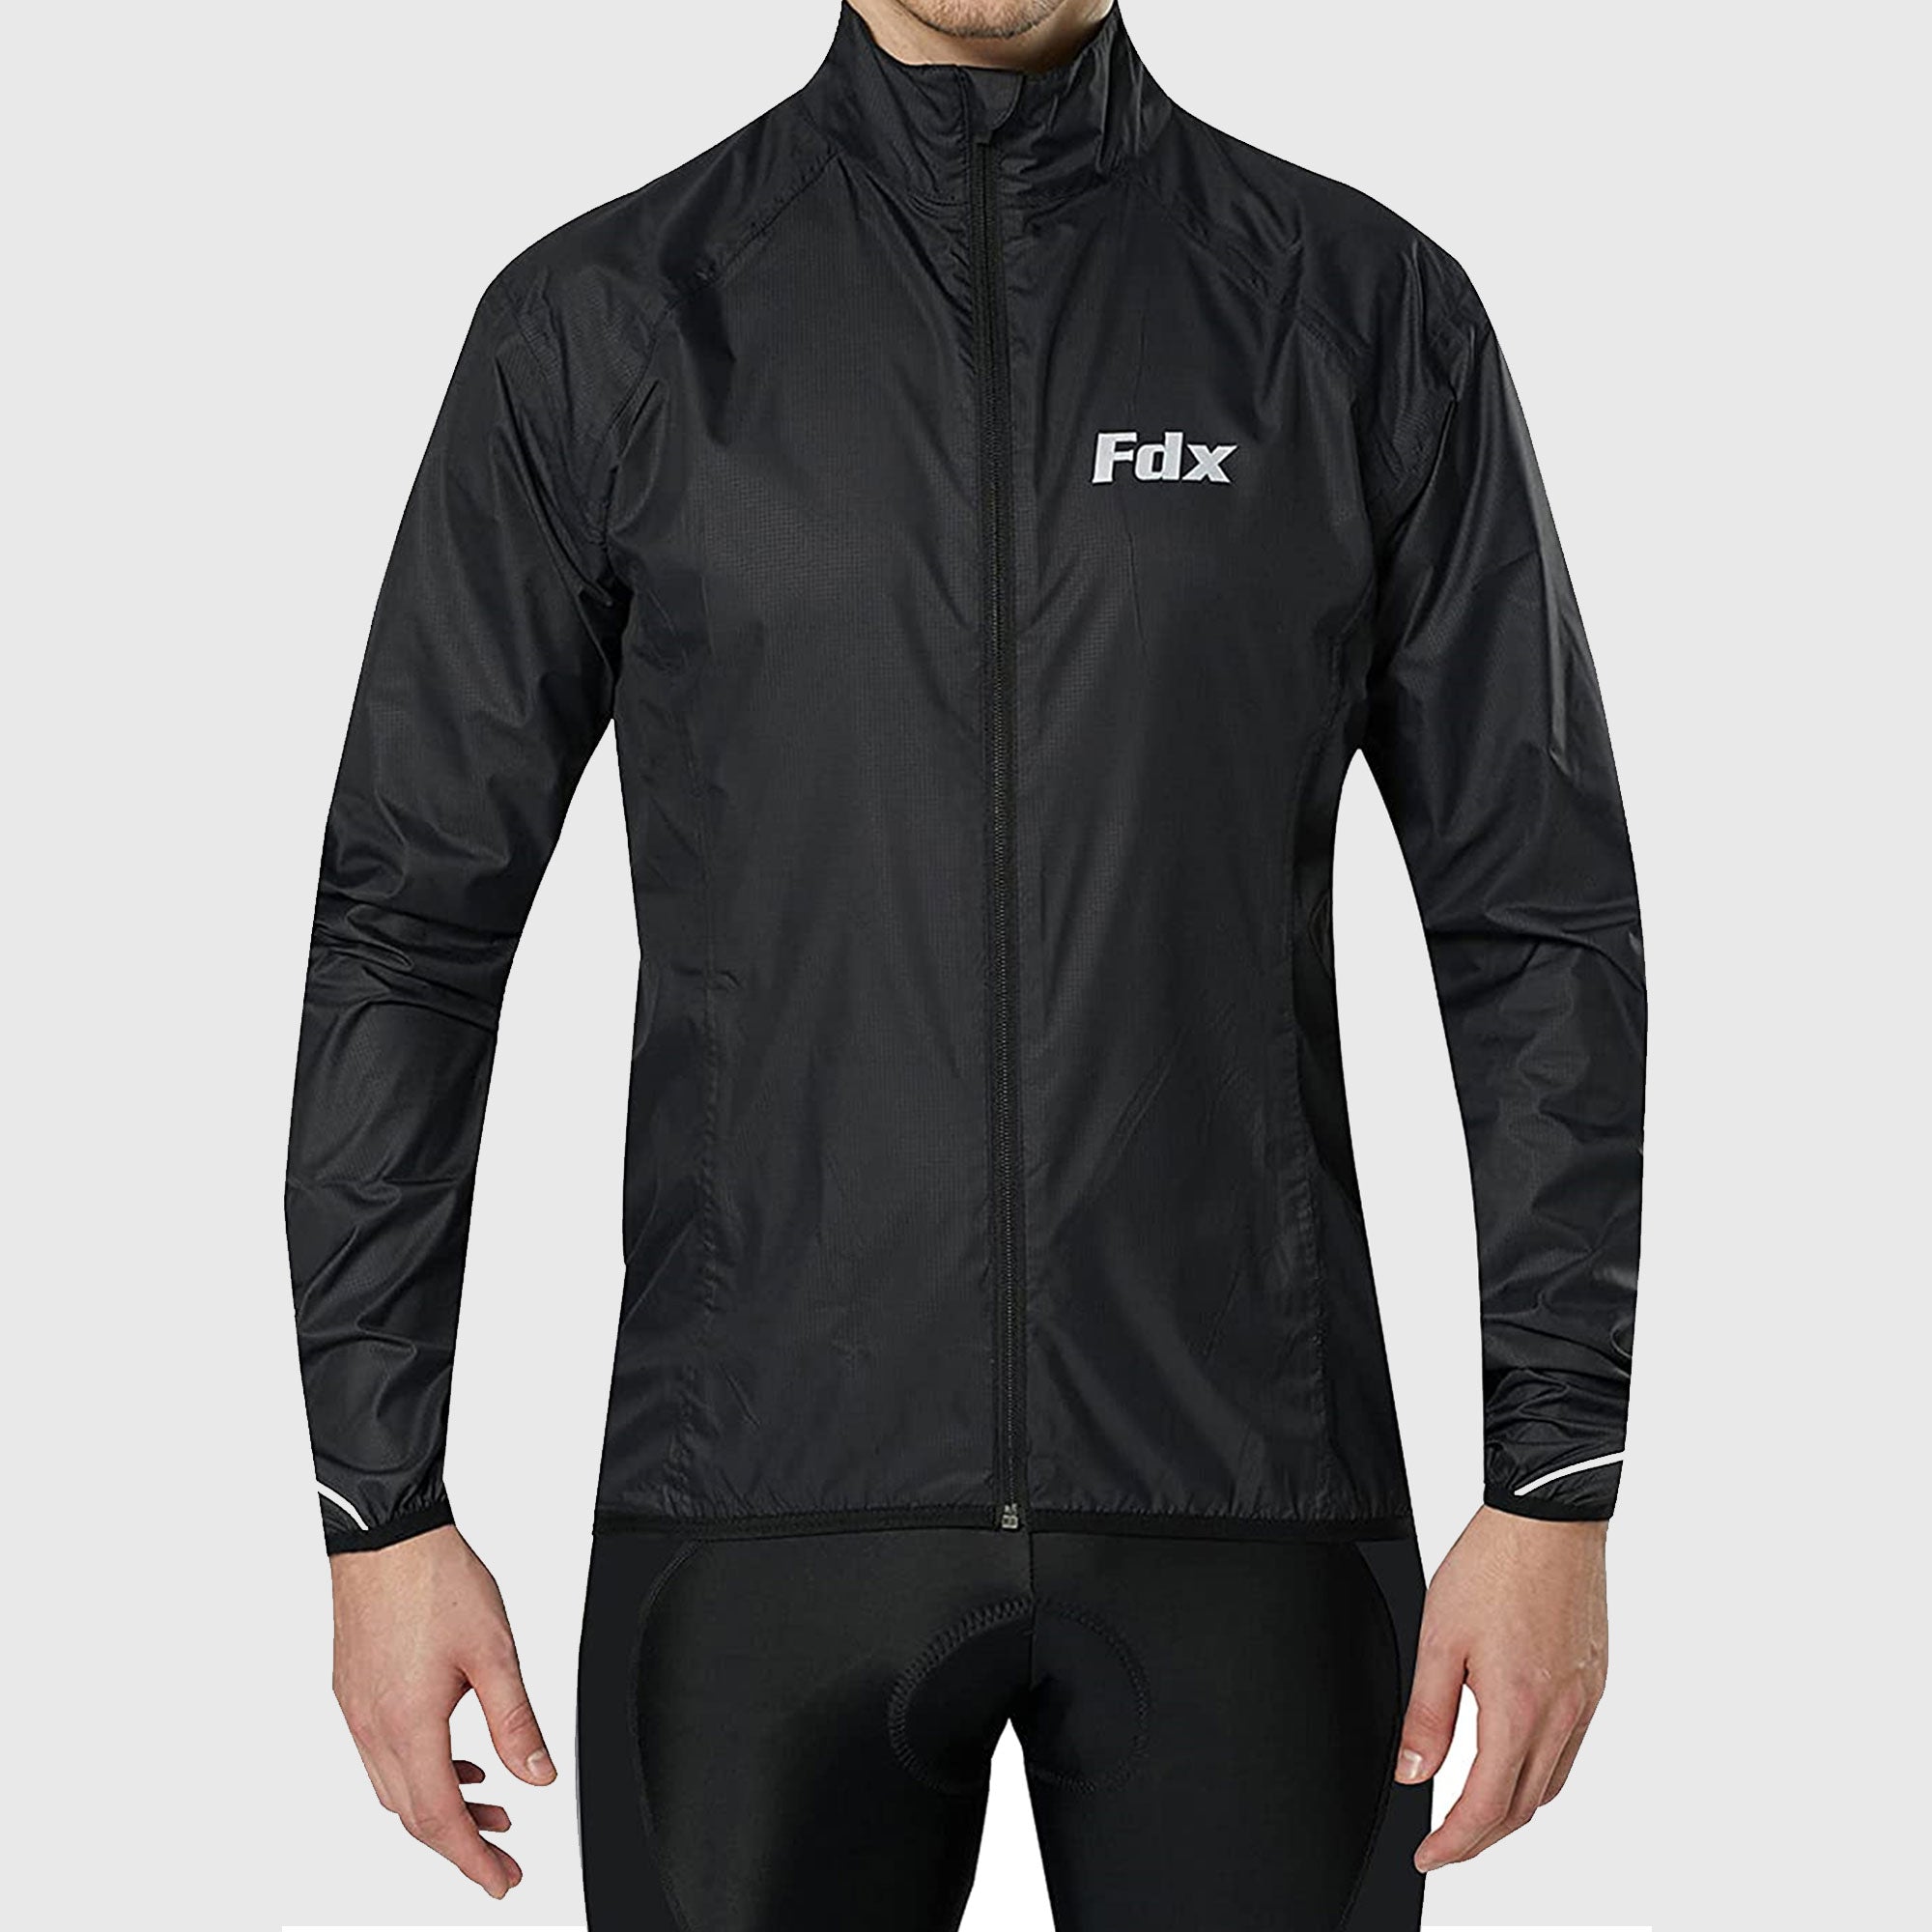 Fdx Men's Black Cycling Jacket for Winter Thermal Casual Softshell Clothing Lightweight, Shaver proof, Packable ,Windproof, Waterproof & Pockets